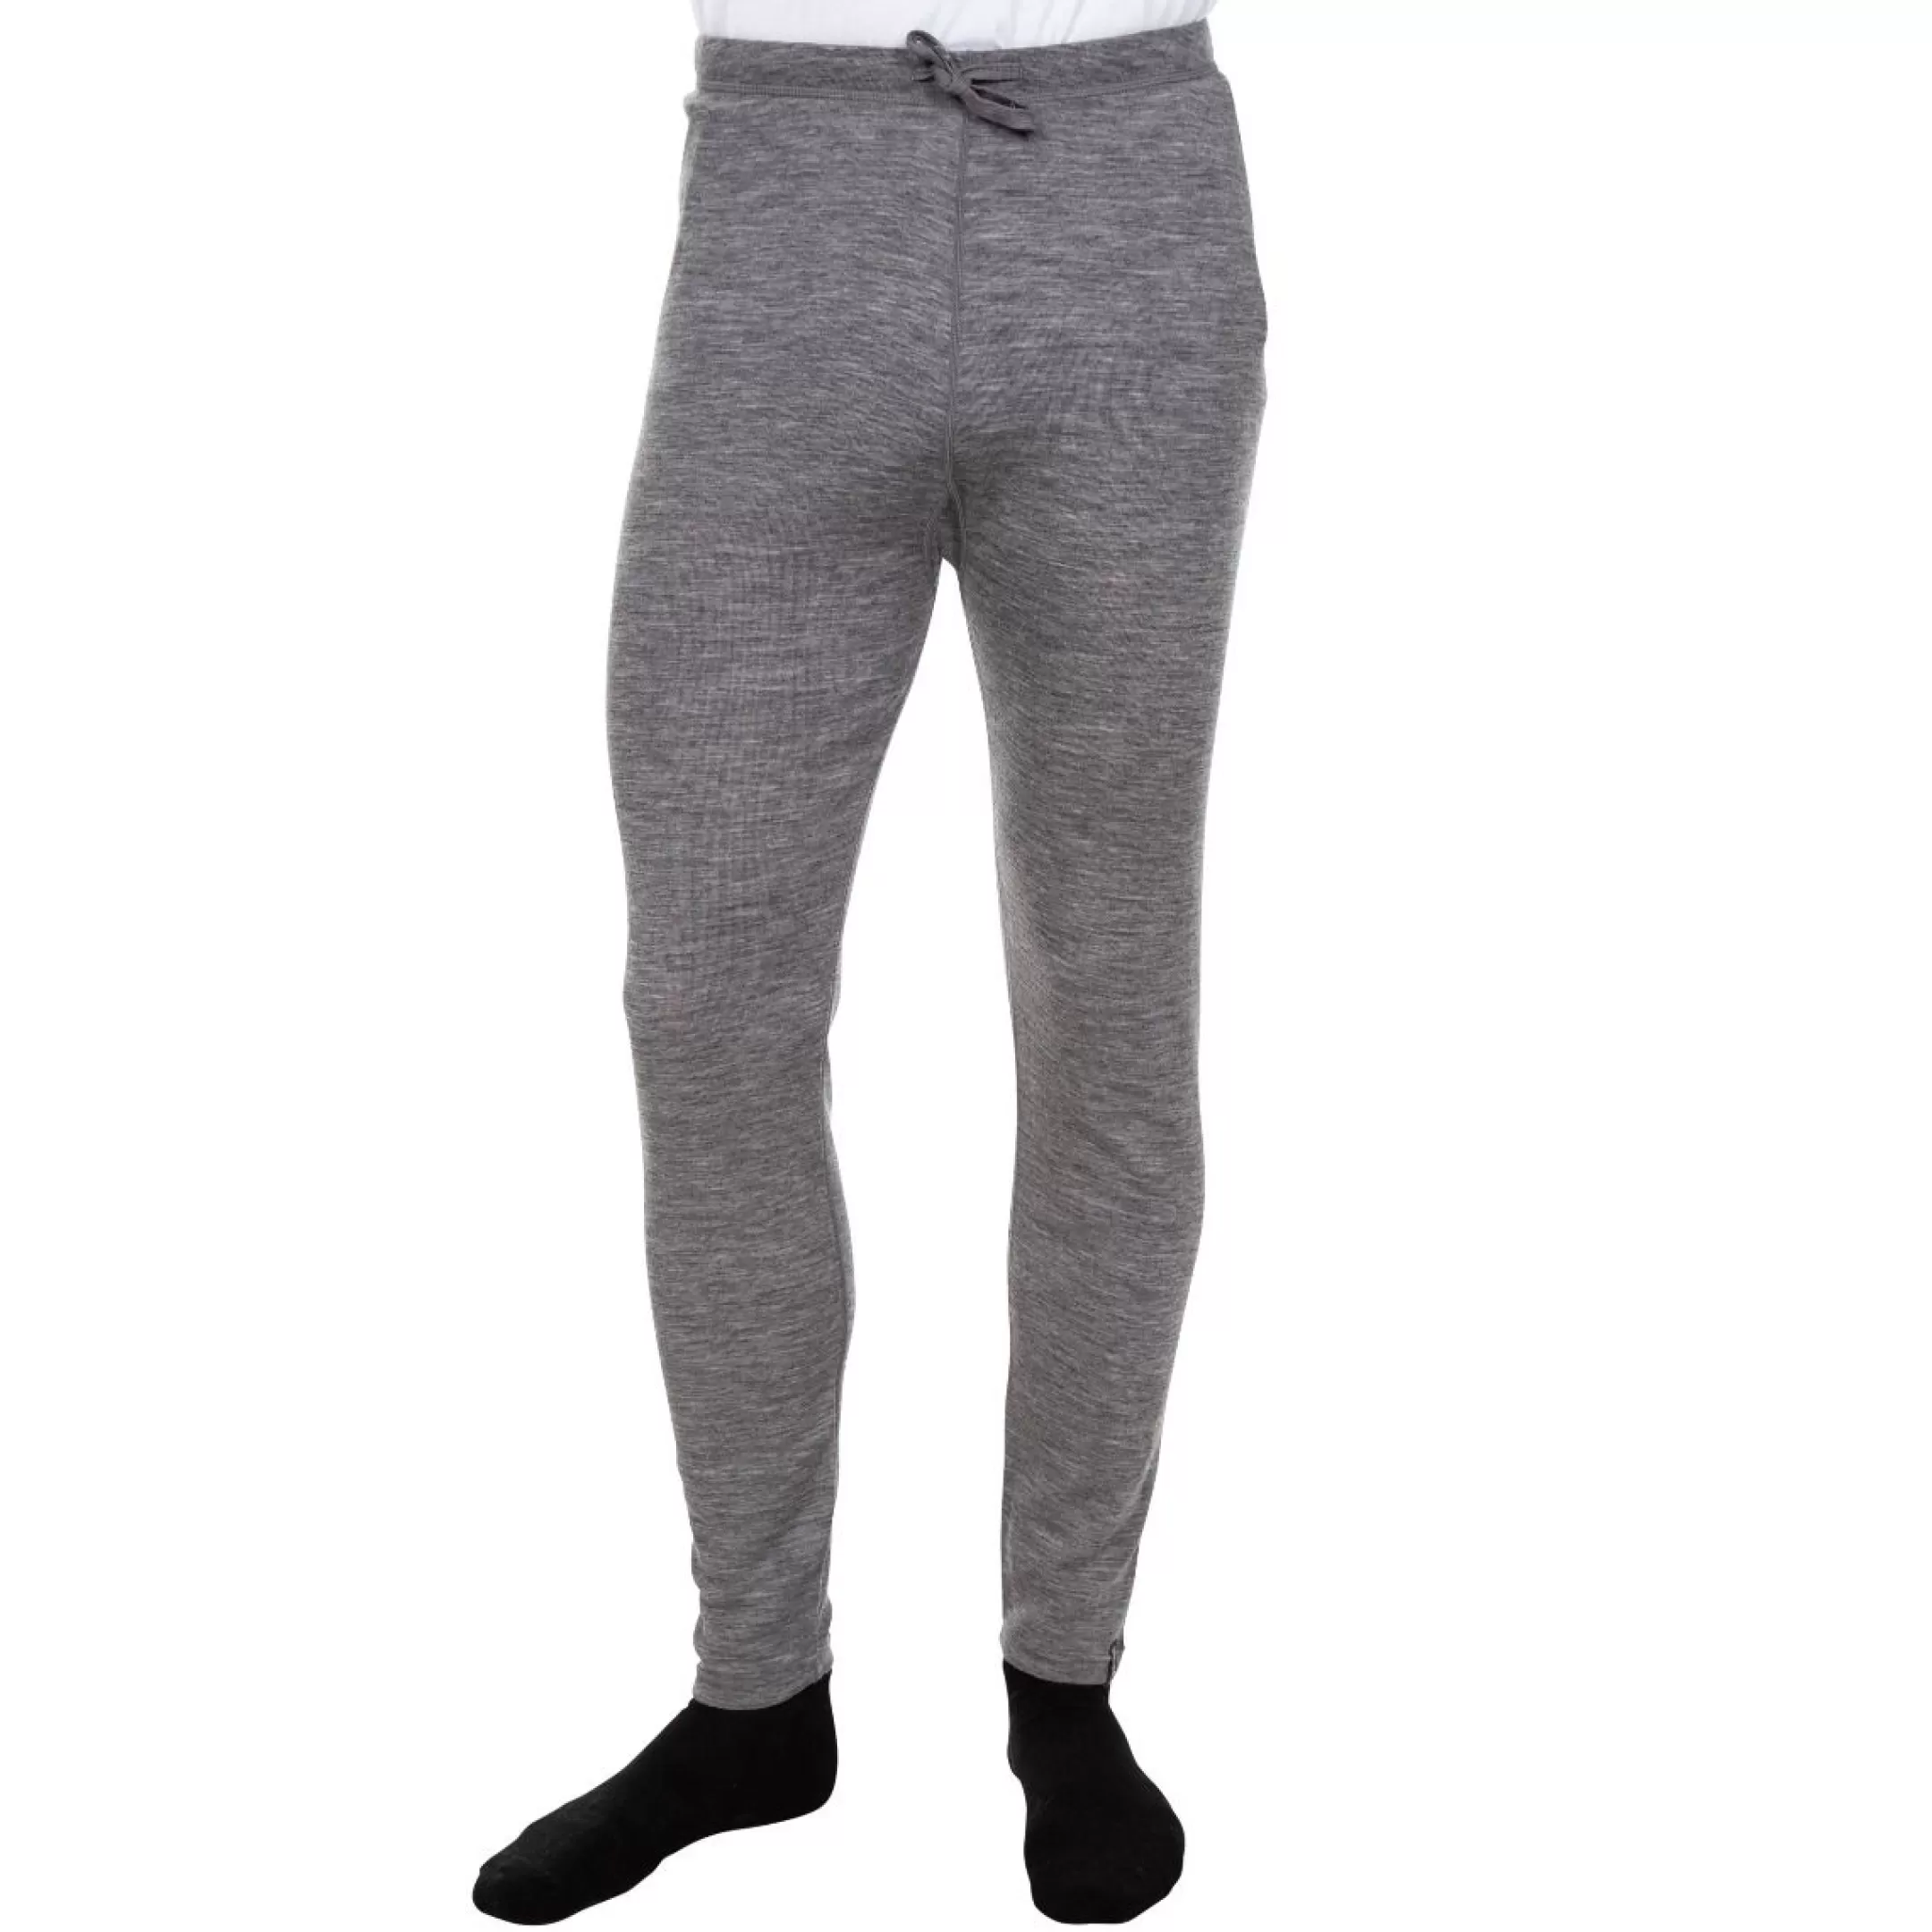 Men's DLX Merino Wool Thermal Trousers Fitchner | Trespass Sale